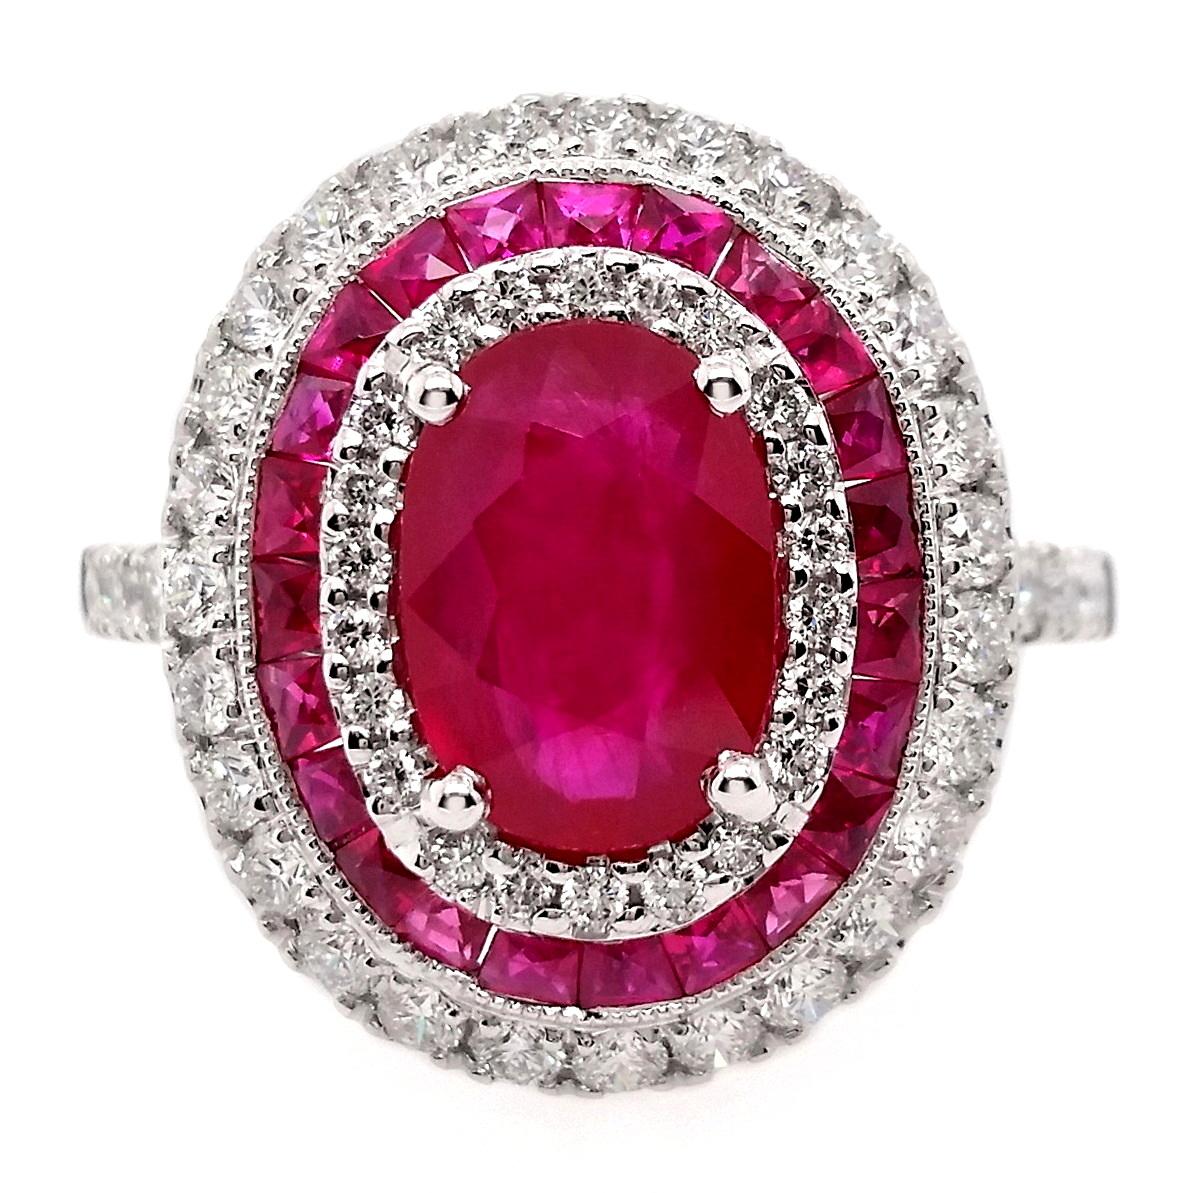 Indulge in the epitome of luxury with our 18k white gold ring—featuring a captivating oval-cut 2.59 carats ruby and a scintillating ensemble of 23 natural trapeze-cut rubies and 57 round brilliant sparkling diamonds. Embrace the allure of this